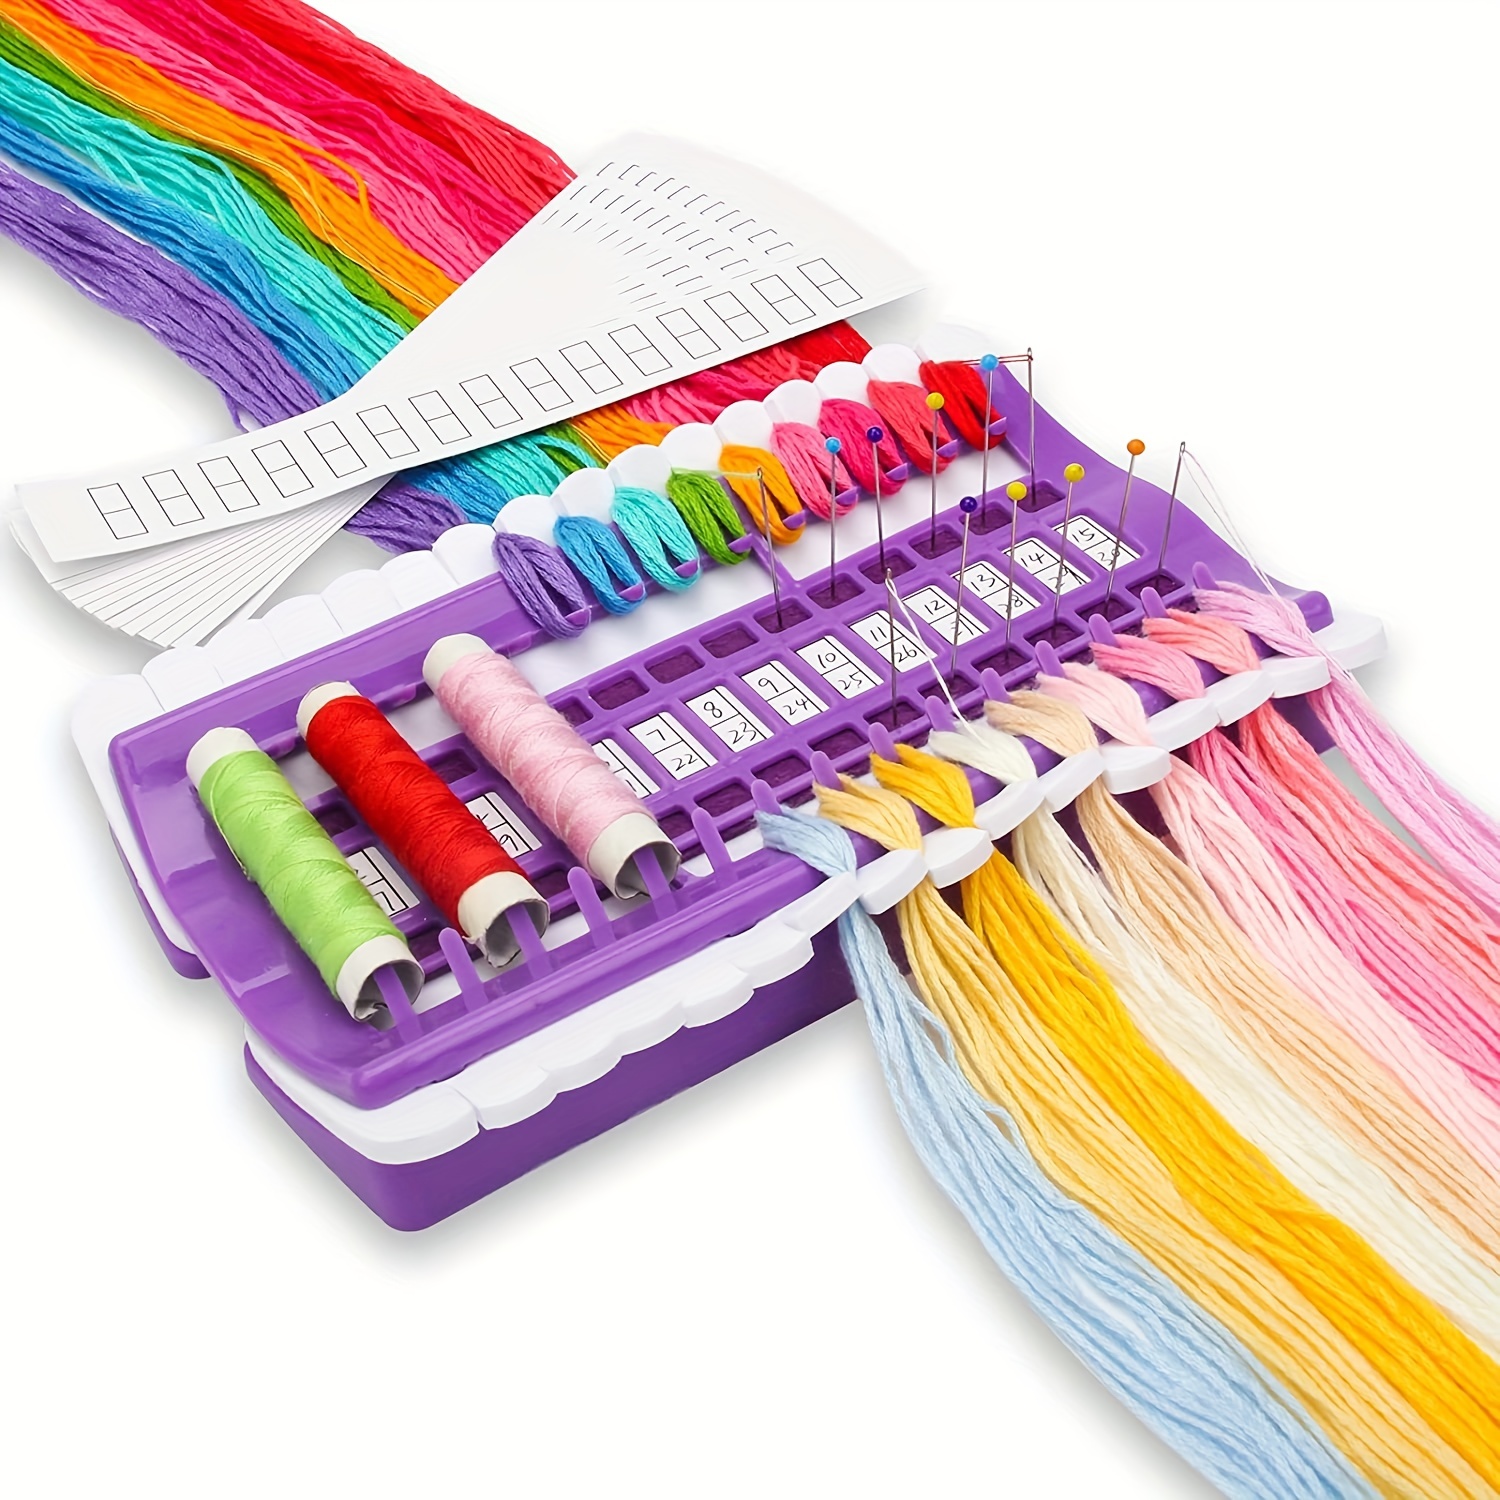 Embroidery Floss Organizer Kit 100 Colors Flosses with 40 Pcs Cross Stitch  Tools